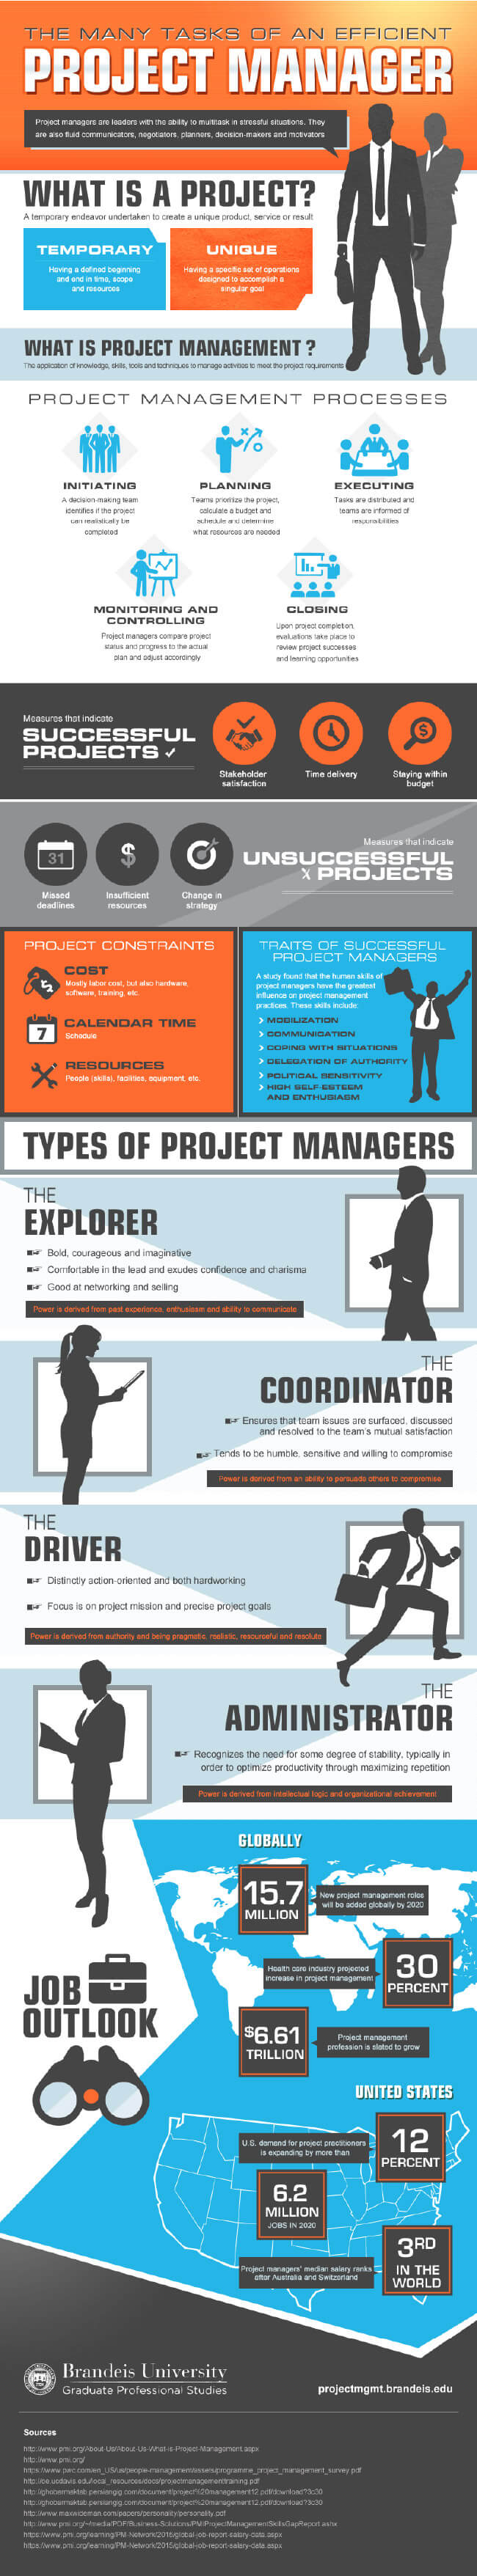 what the heck does a project manager do anyway tipsographic main